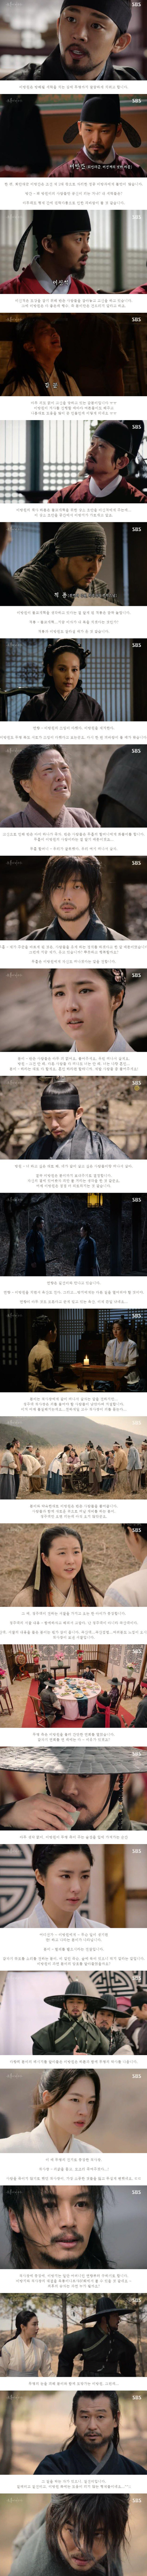 episode 49 captures for the Korean drama 'Six Flying Dragons'